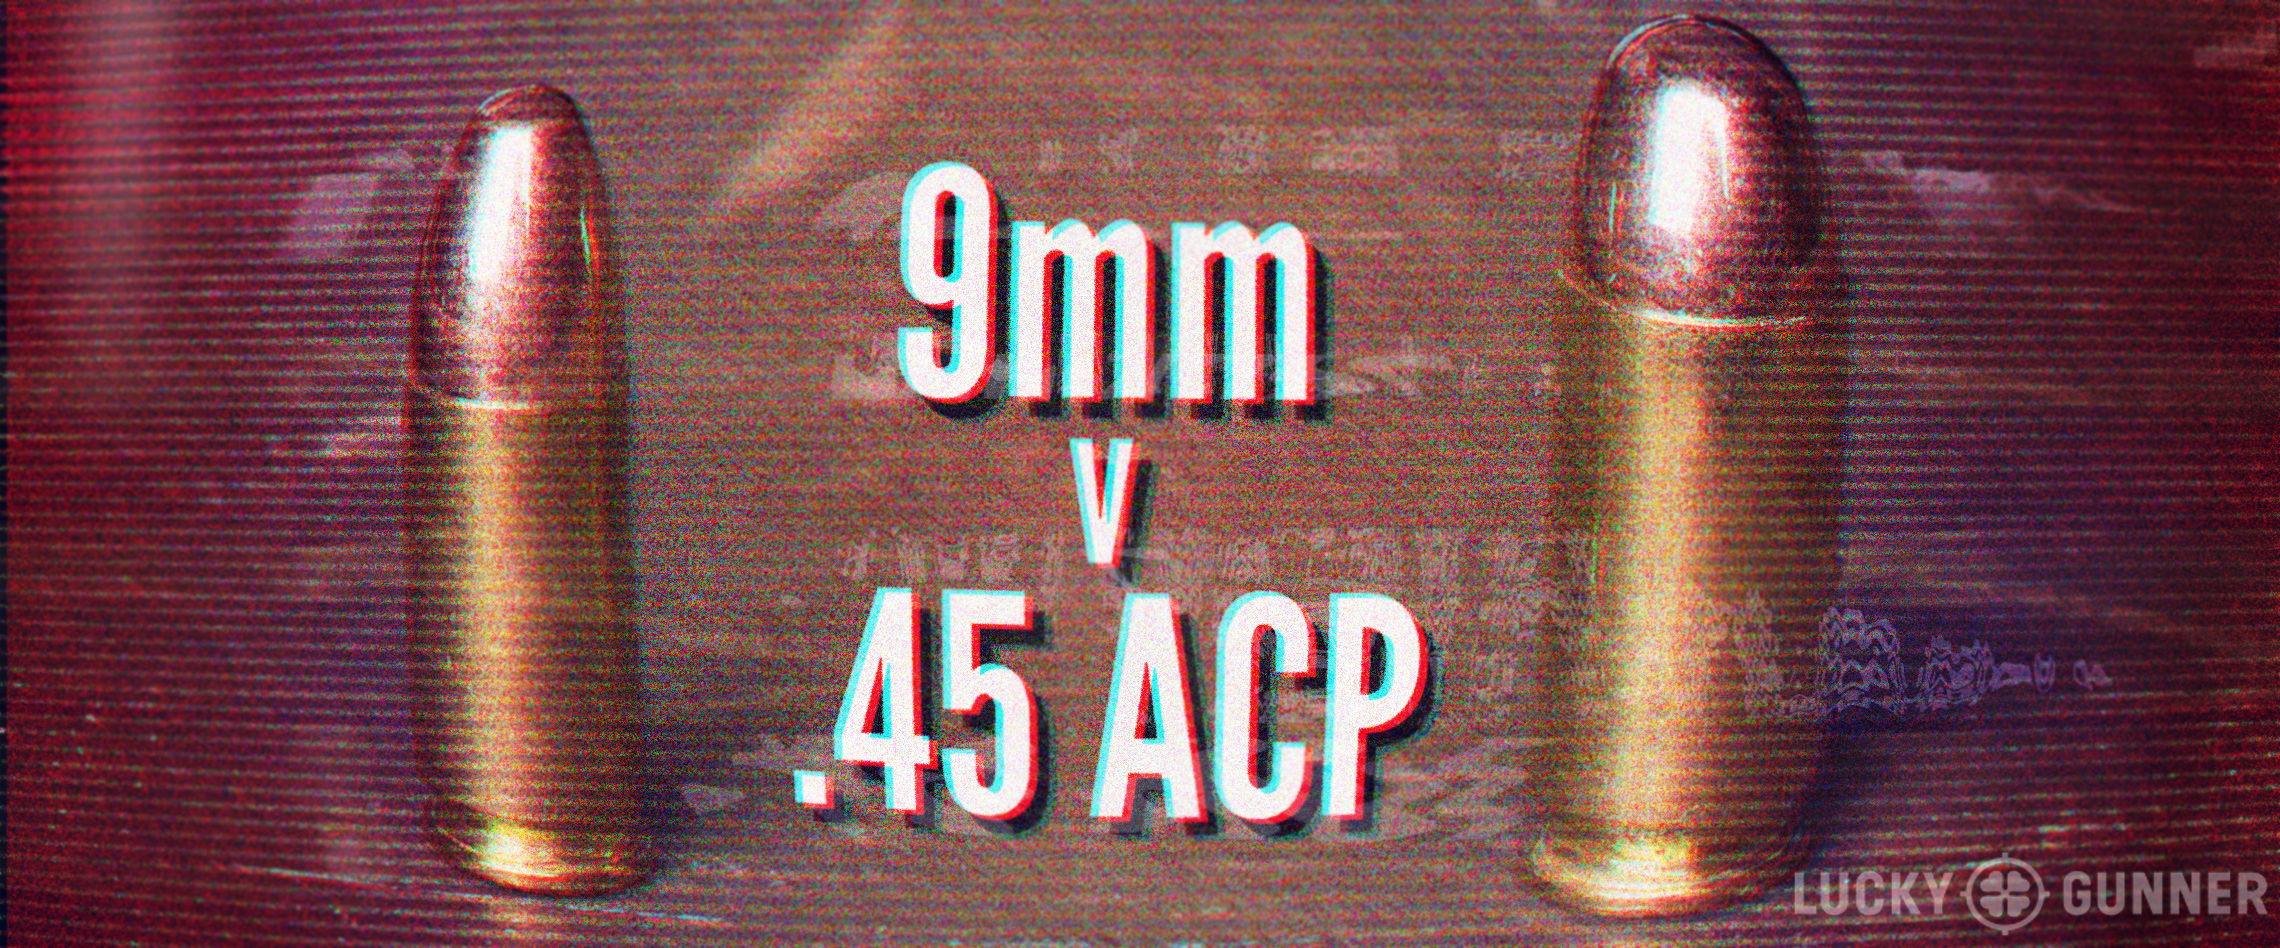 9mm Vs 45 Acp Retro Edition Lucky Gunner Lounge. black kitchen with mermaid...